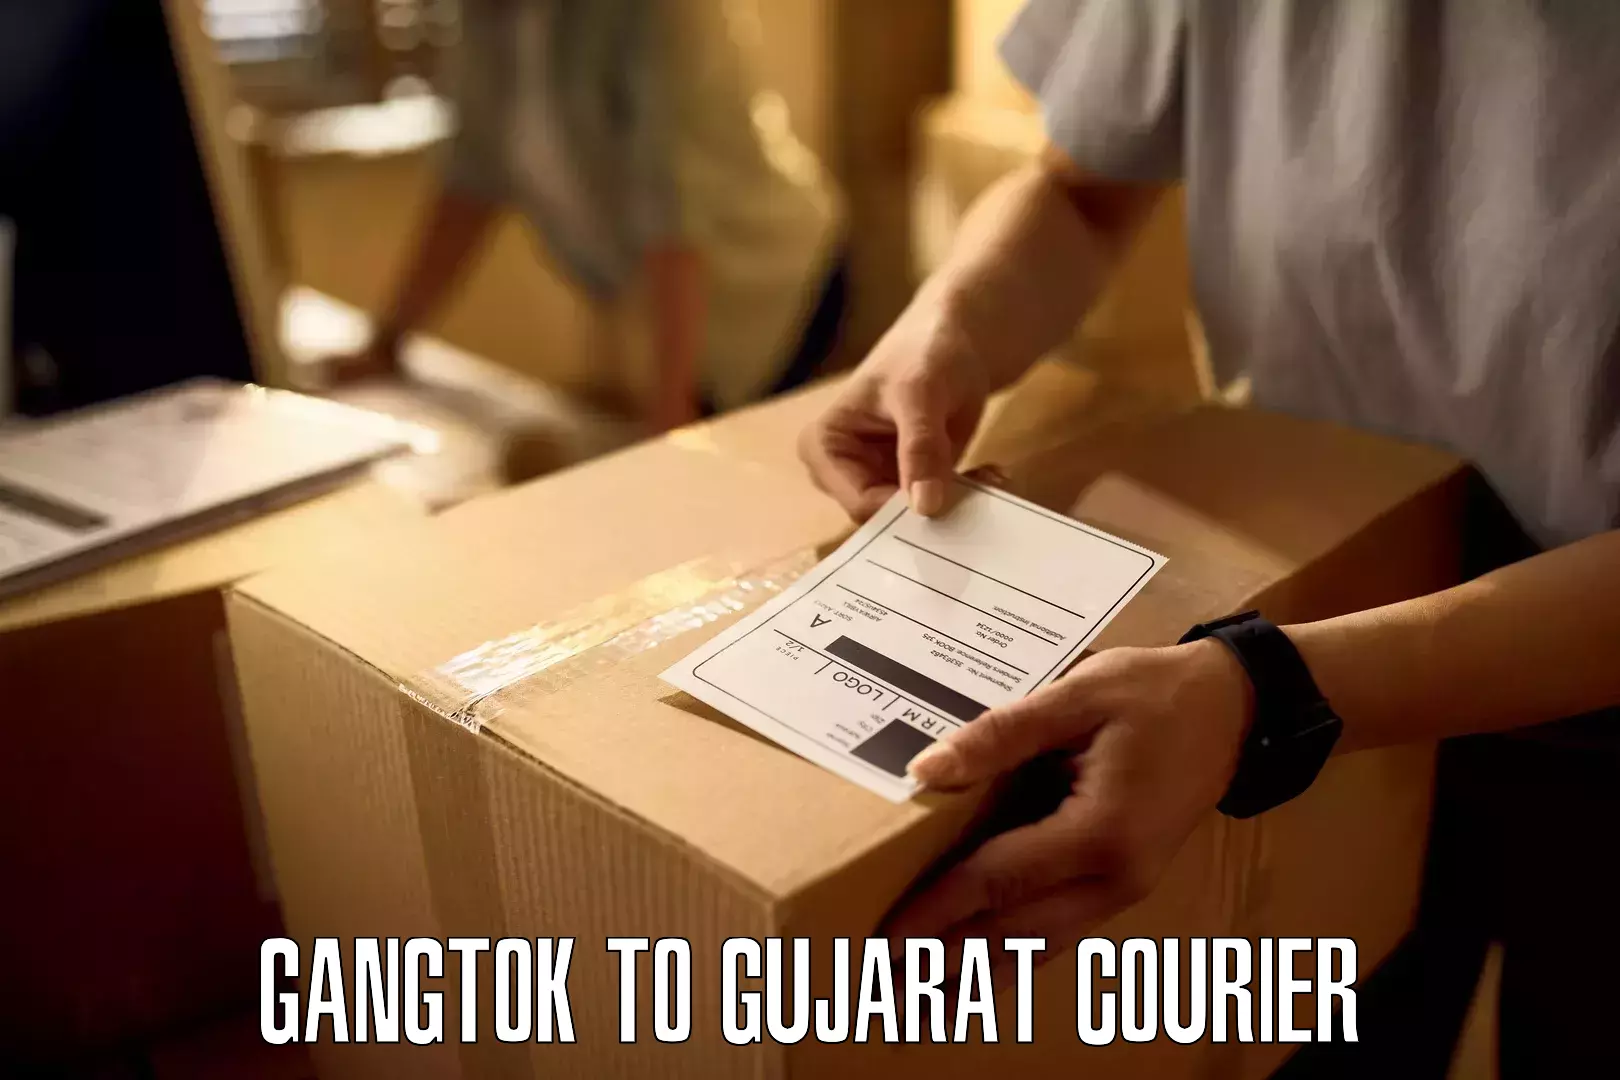 Next-day delivery options Gangtok to Dholera